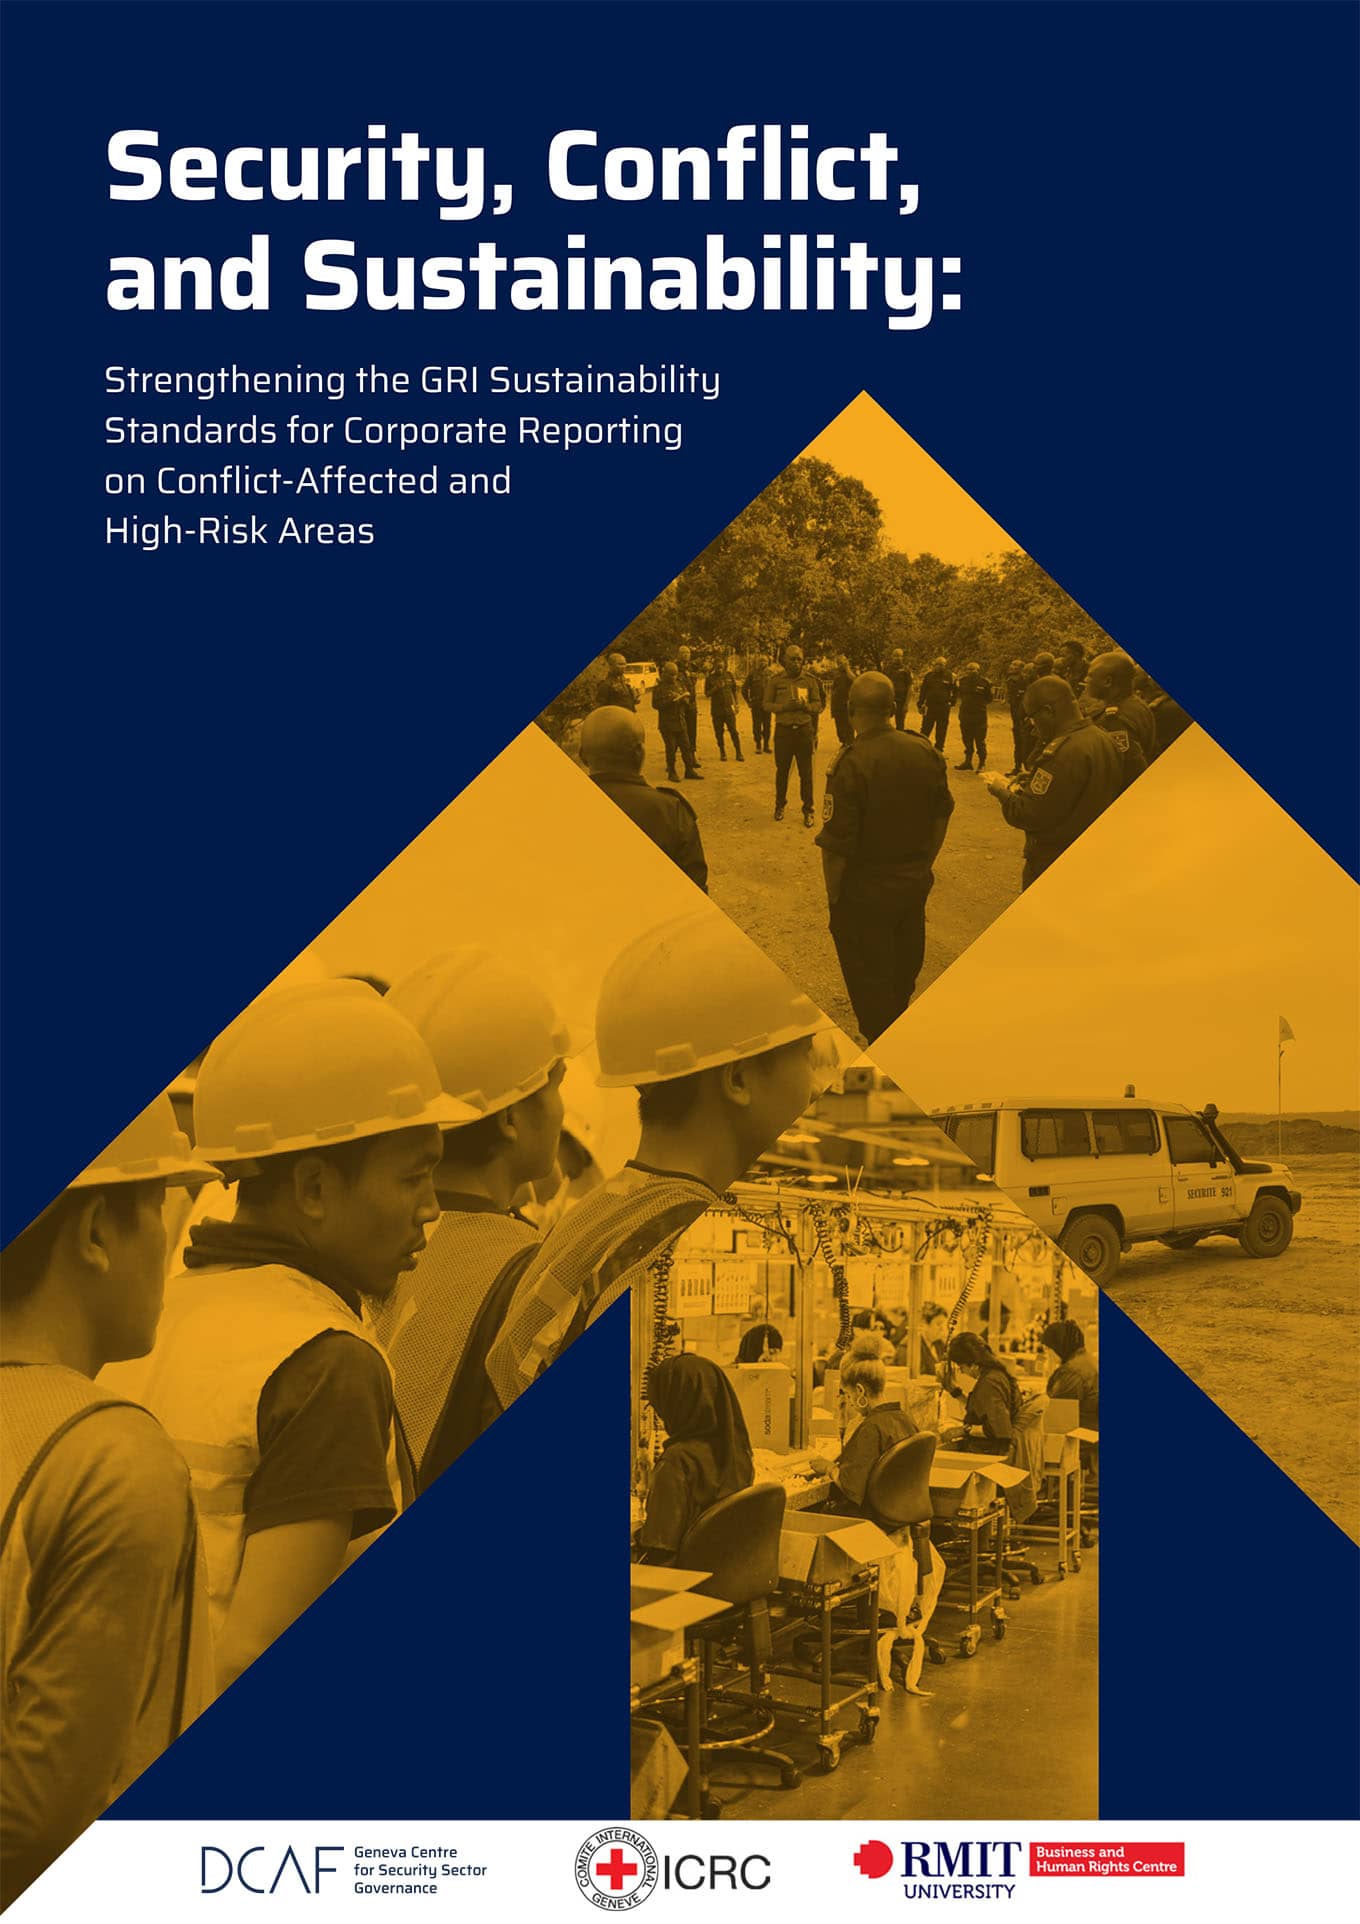 Security, Conflict, and Sustainability: Strengthening the GRI Sustainability Standards for Corporate Reporting on Conflict-Affected and High-Risk Areas